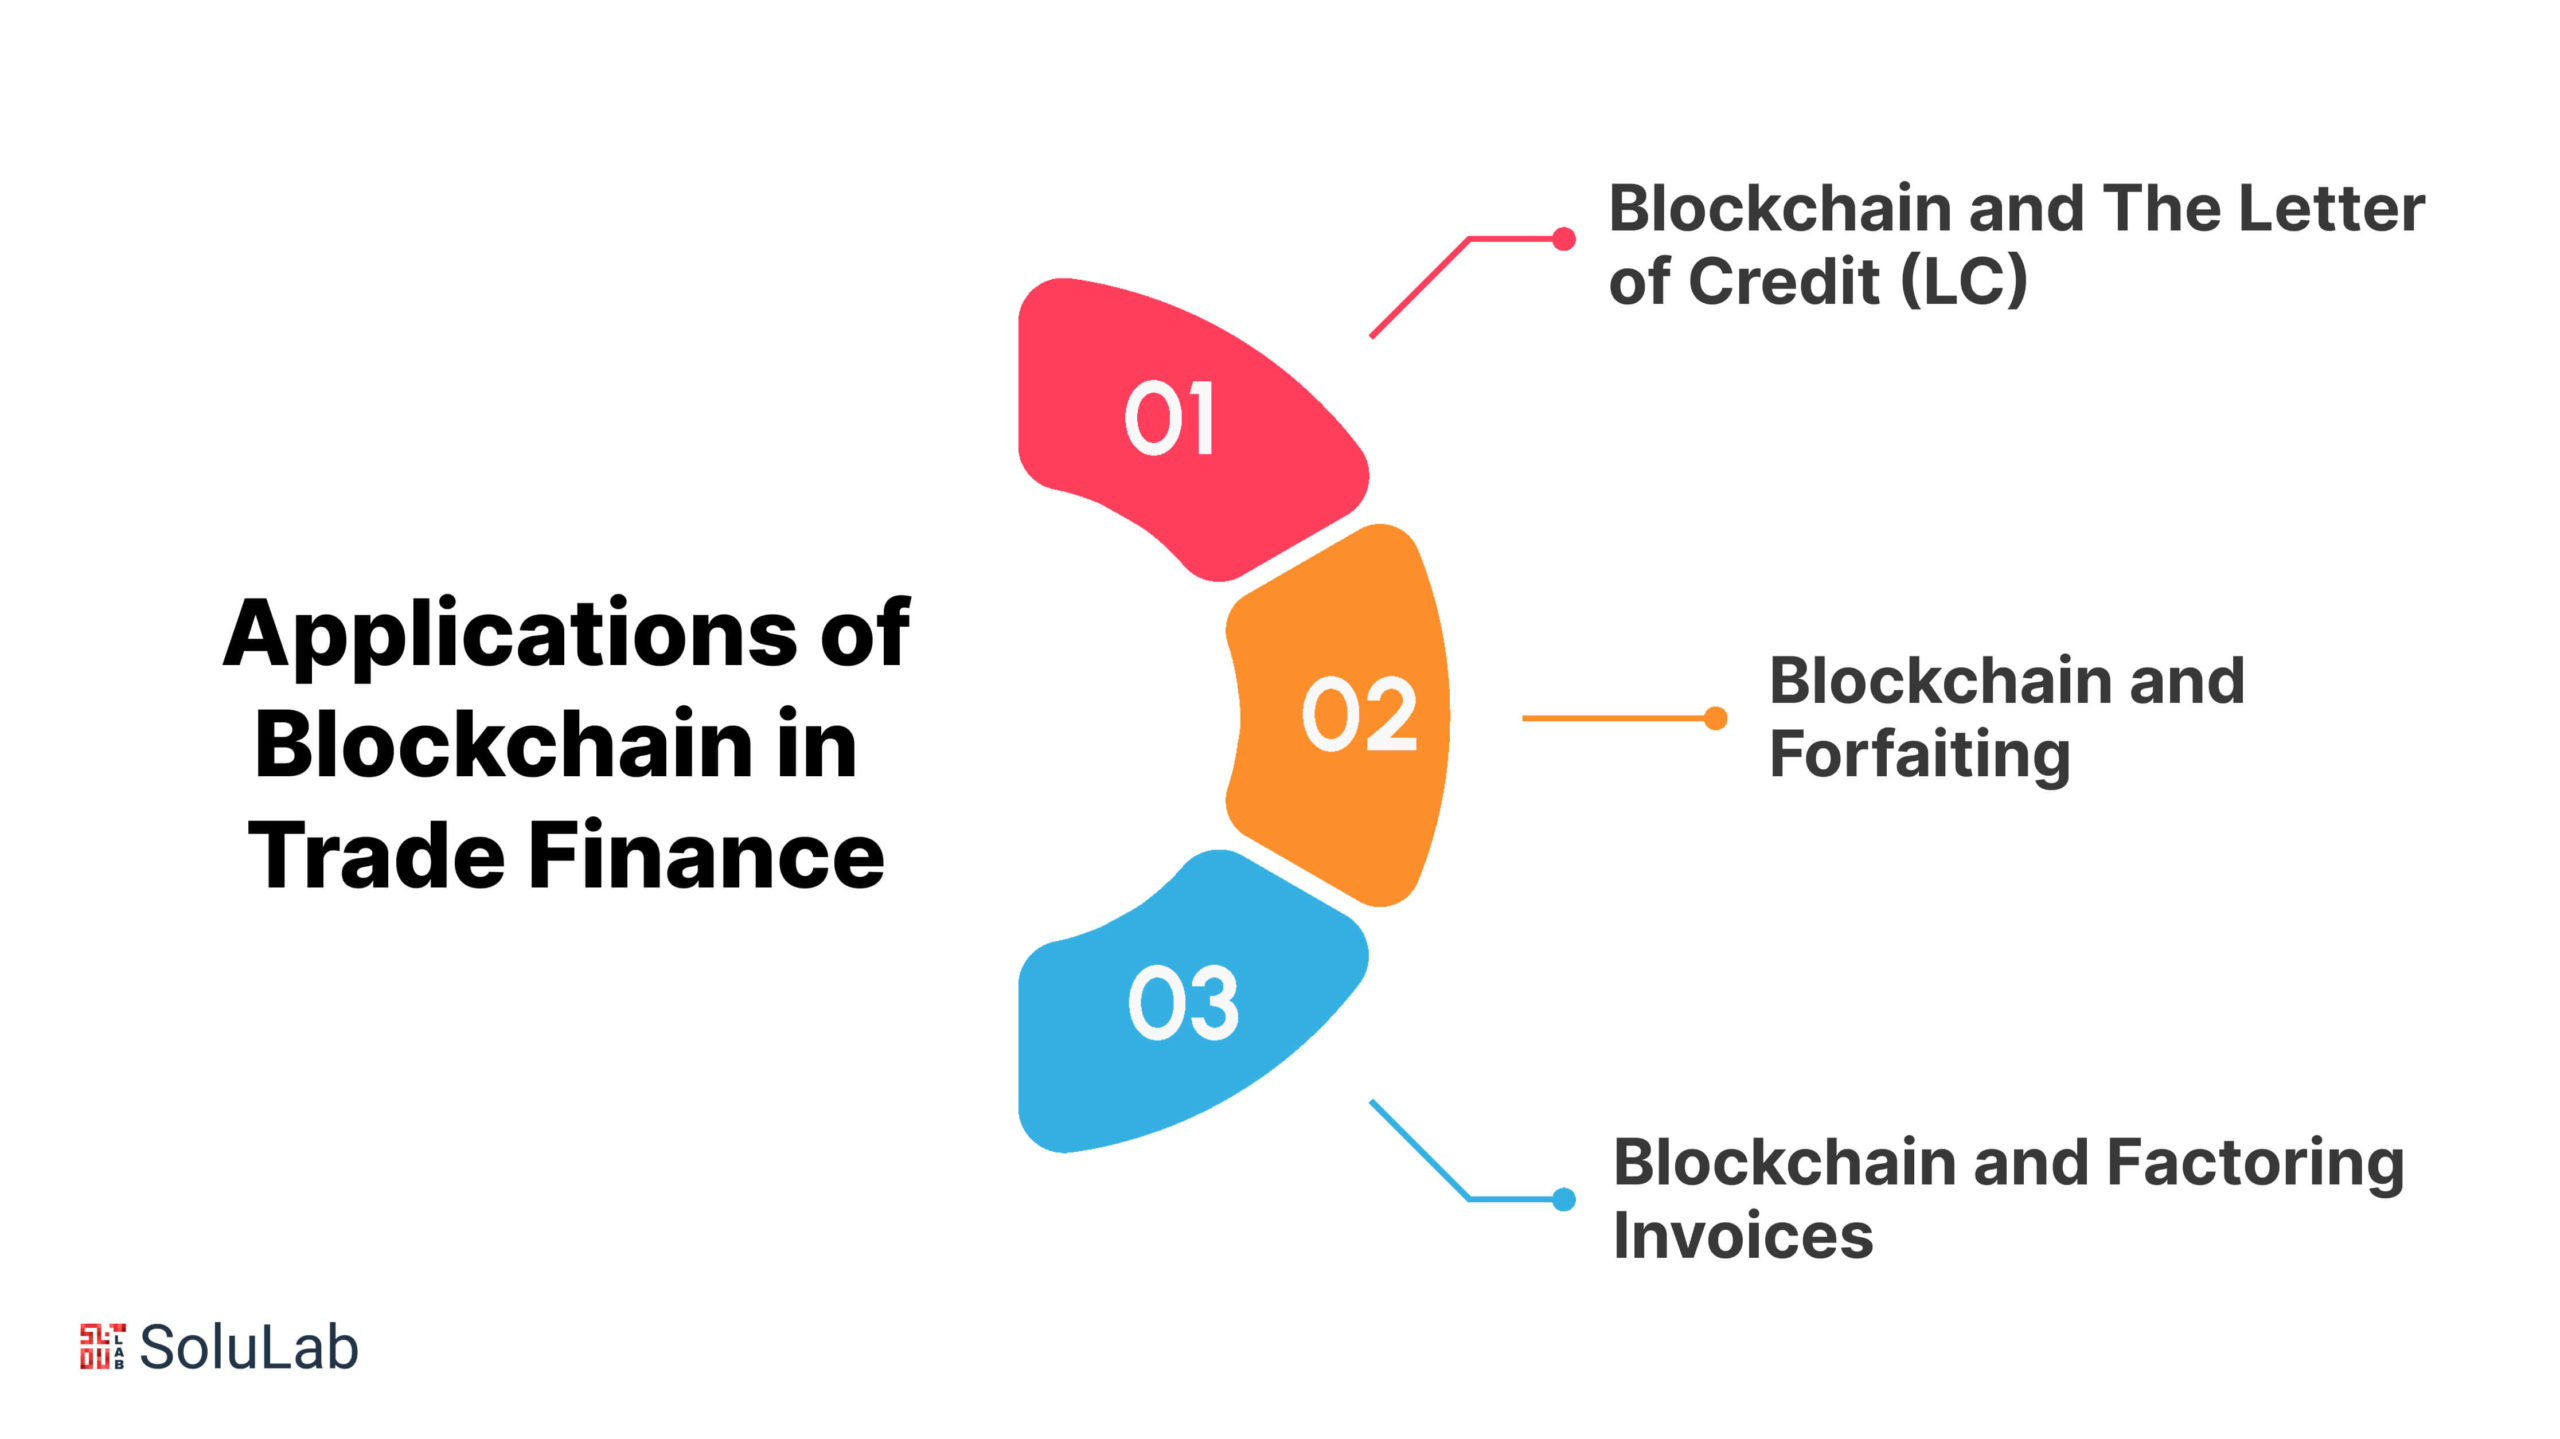 Applications of Blockchain in Trade Finance